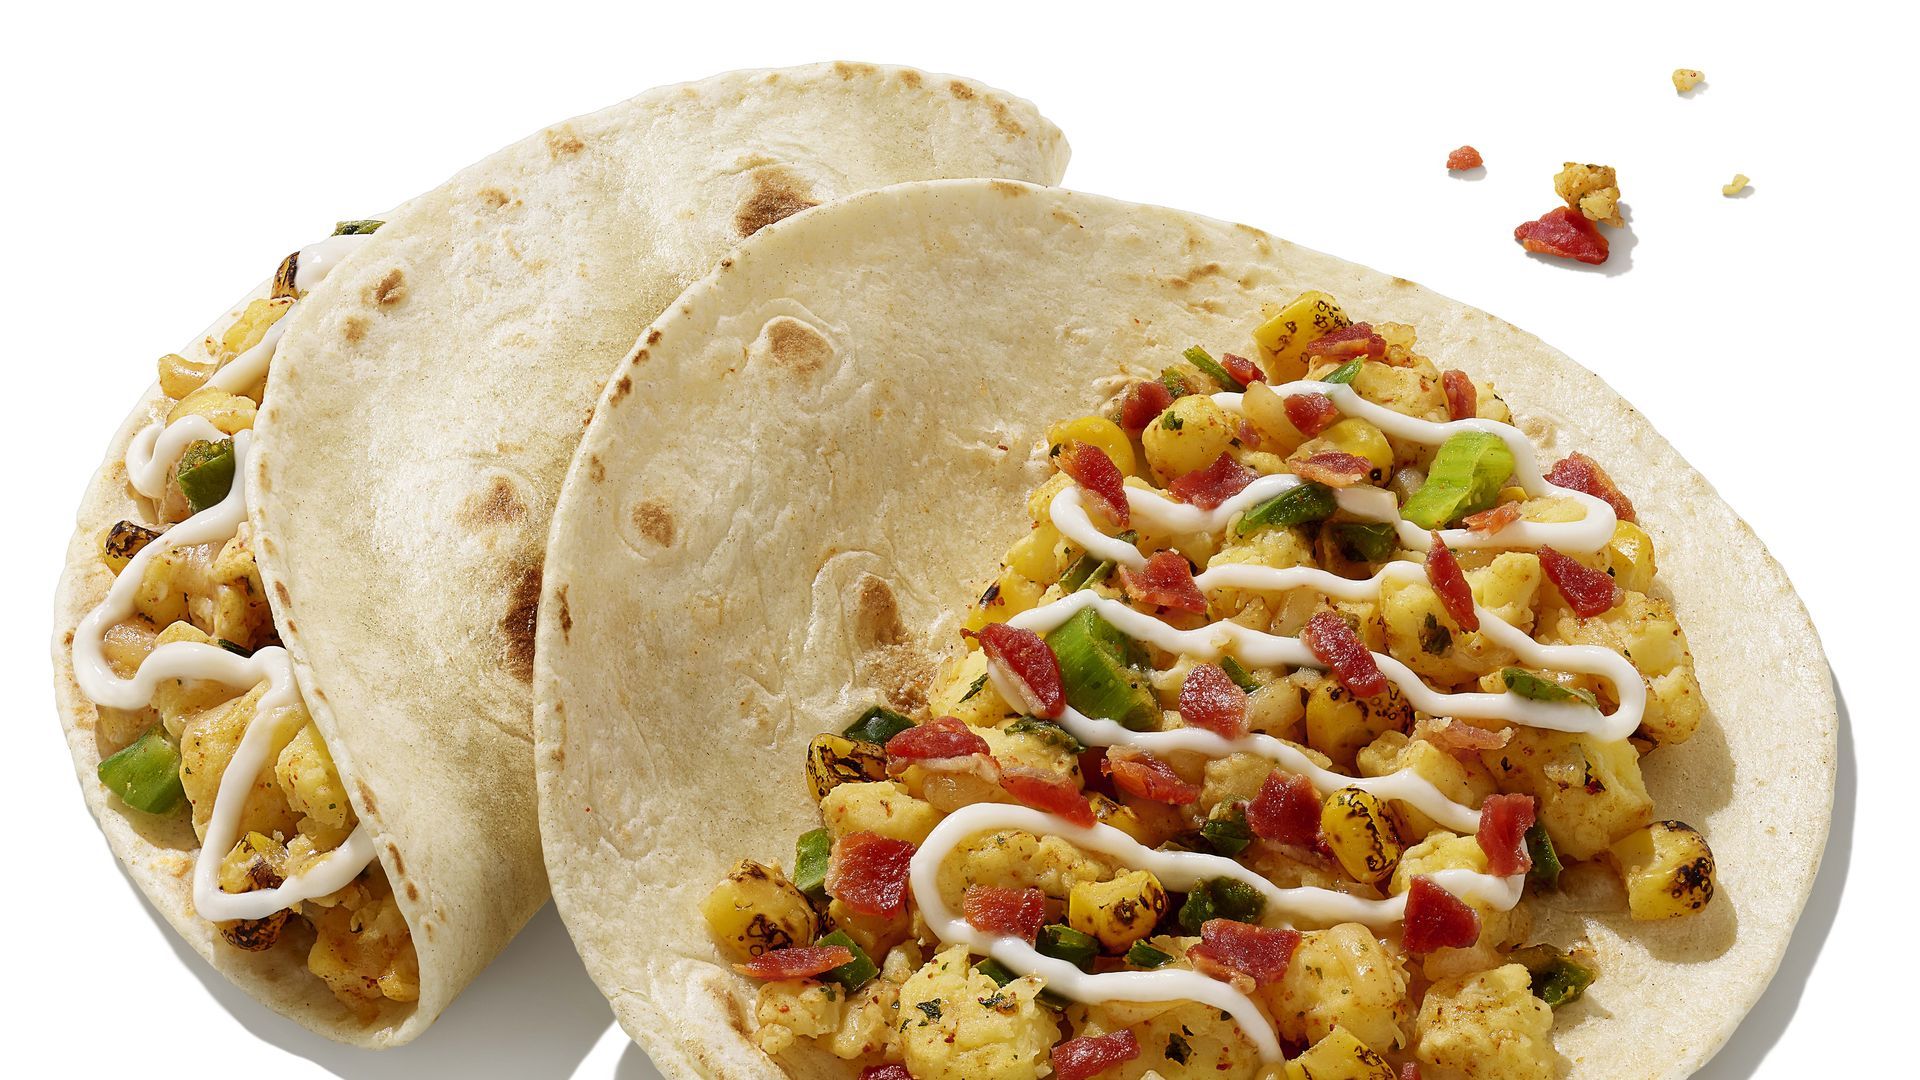 Breakfast tacos are now available at Dunkin' restaurants nationwide. 